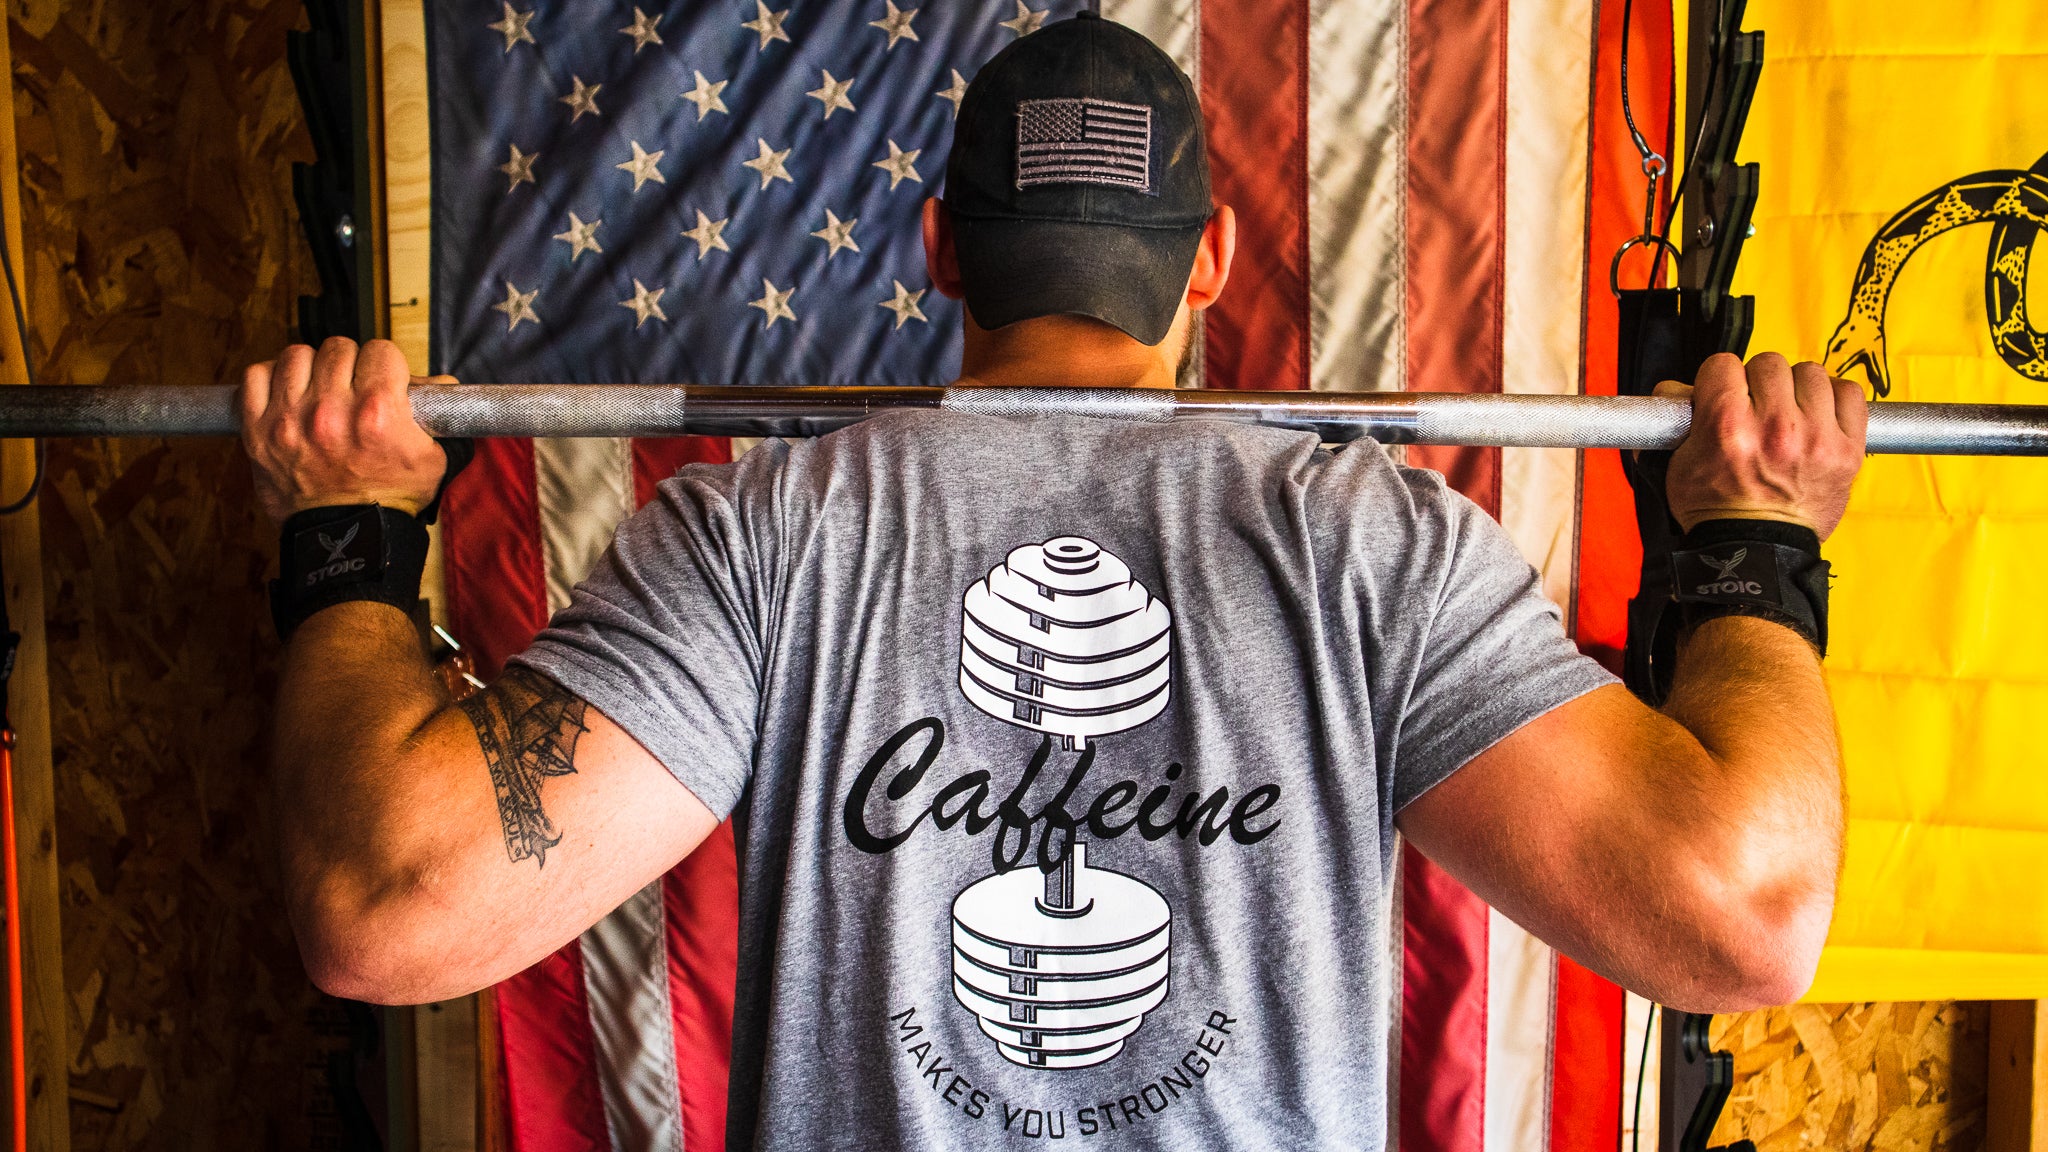 Caffeine Makes You Stronger - Send It Supplements